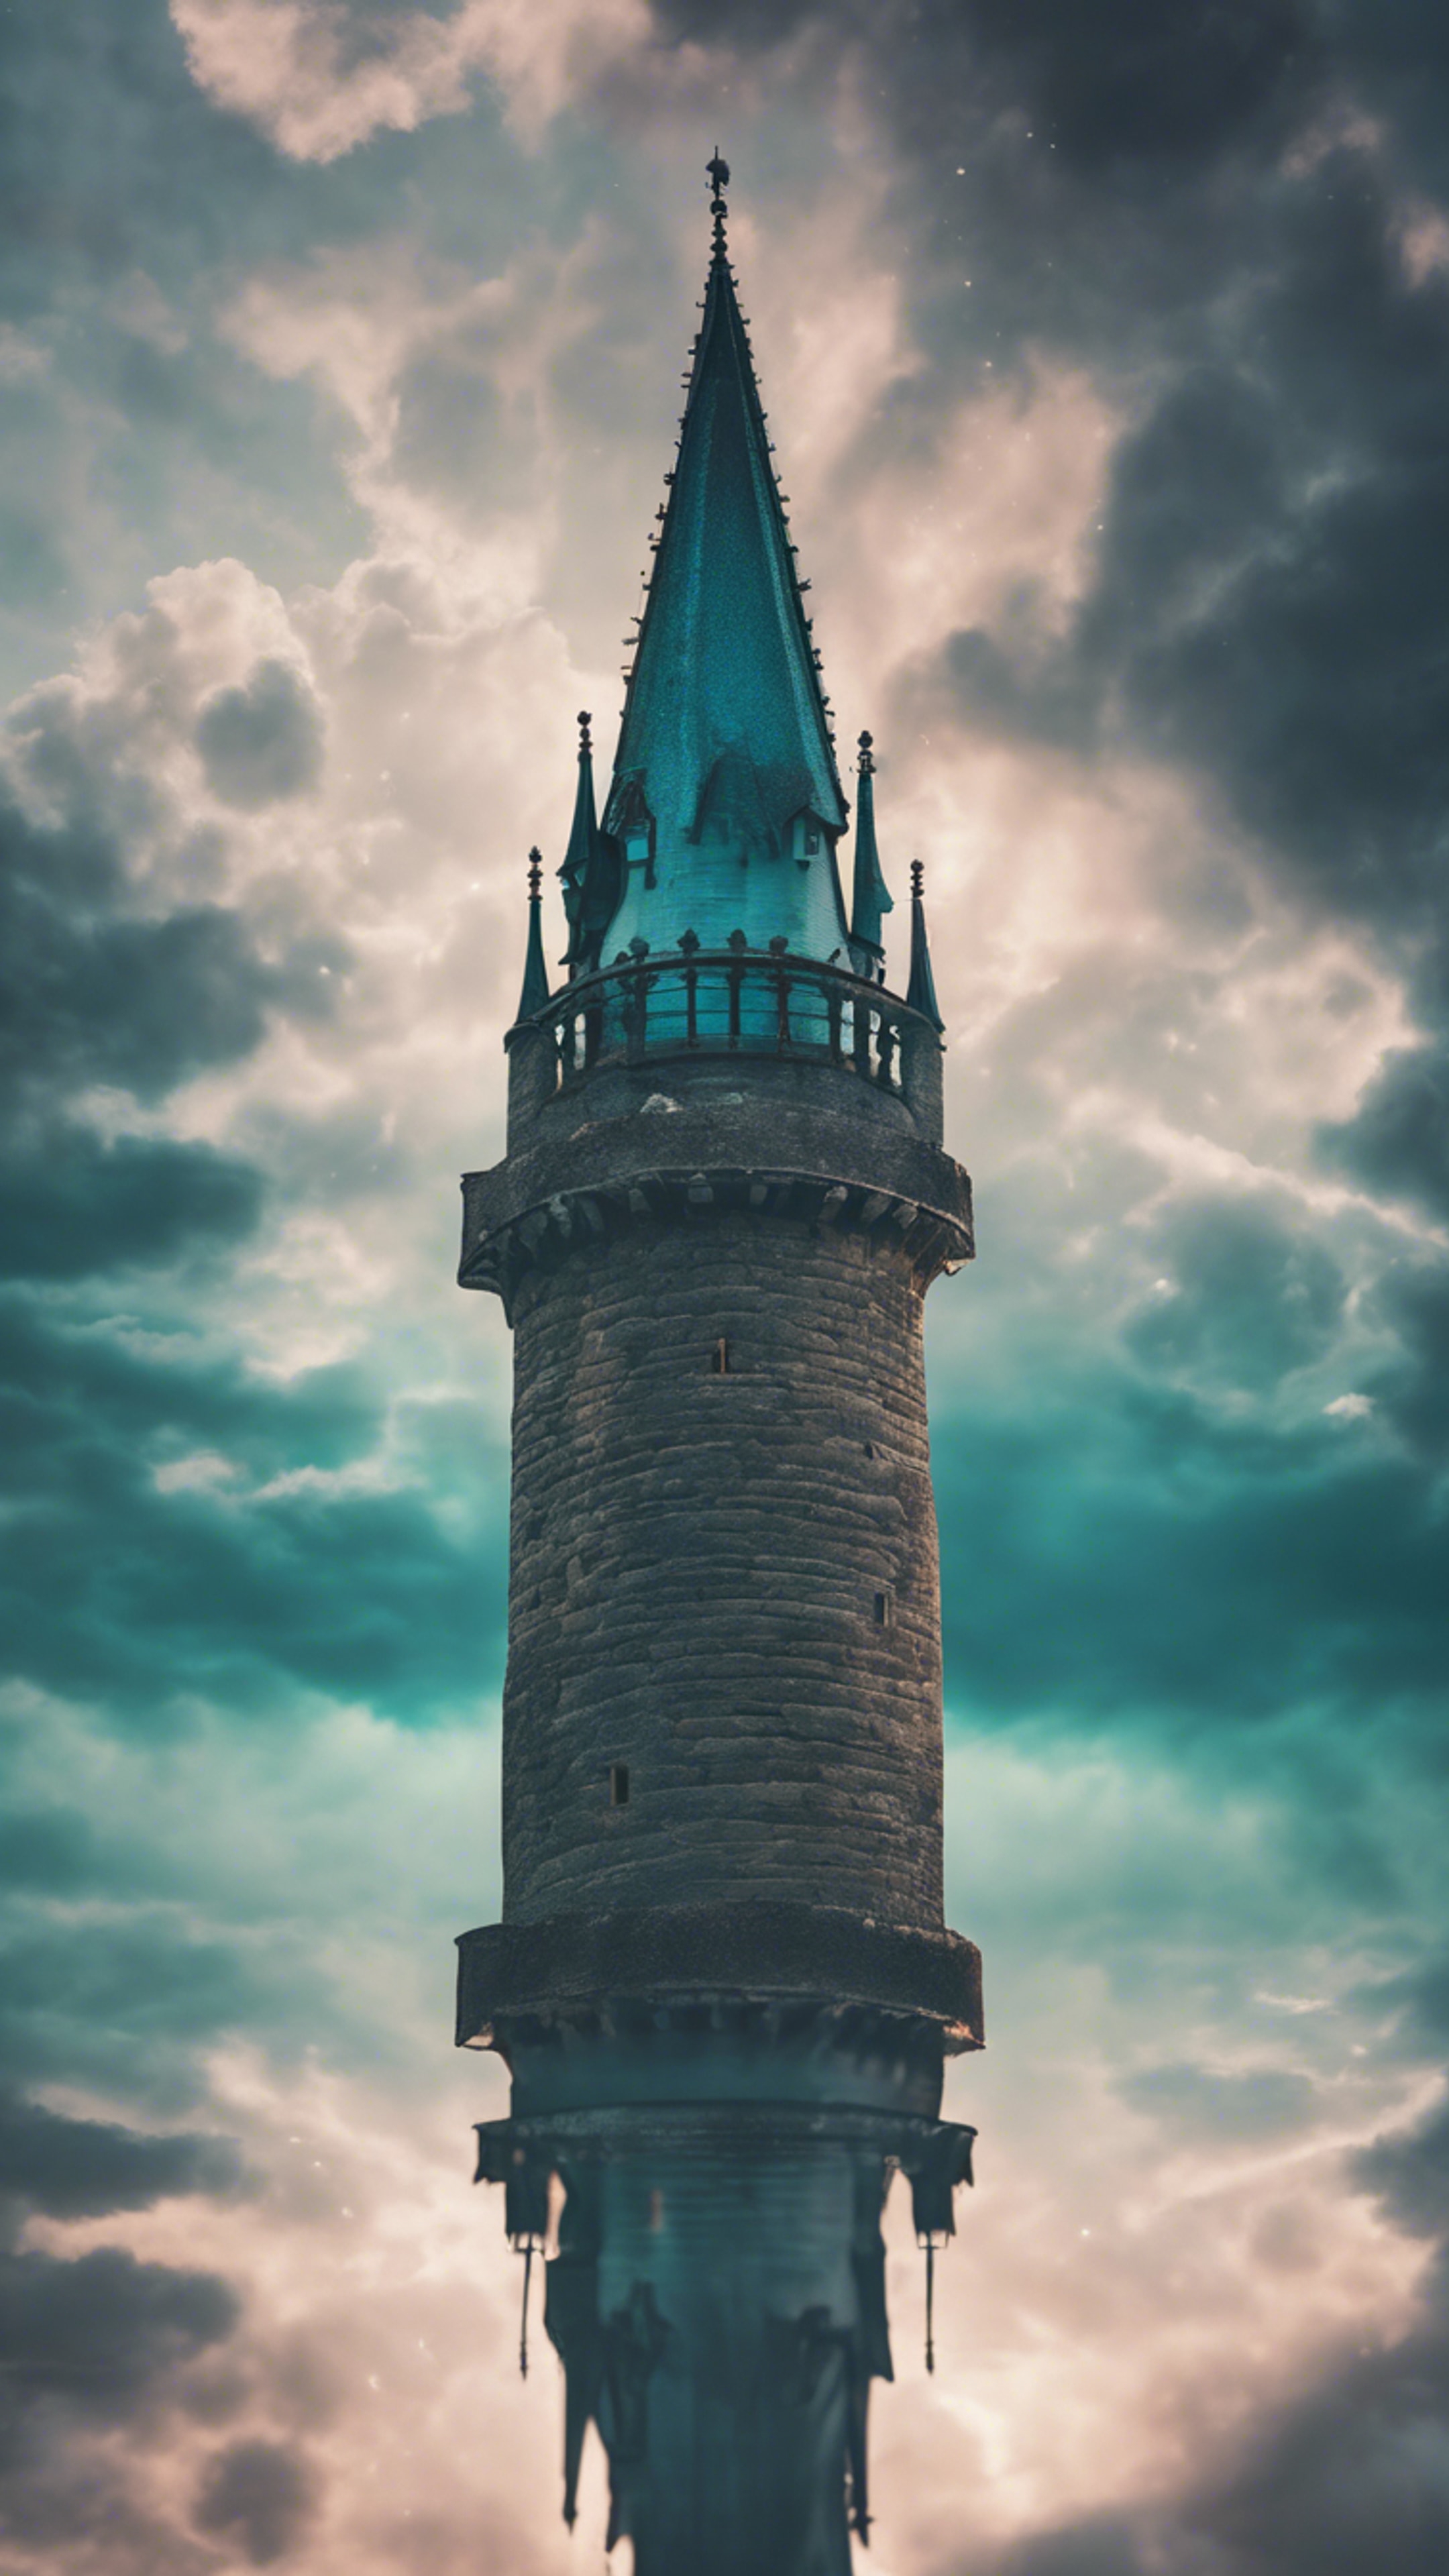 A Gothic castle tower reaching into the clouds, lit from within by mystery teal lights. Tapetai[95b6d3de171842619bd4]